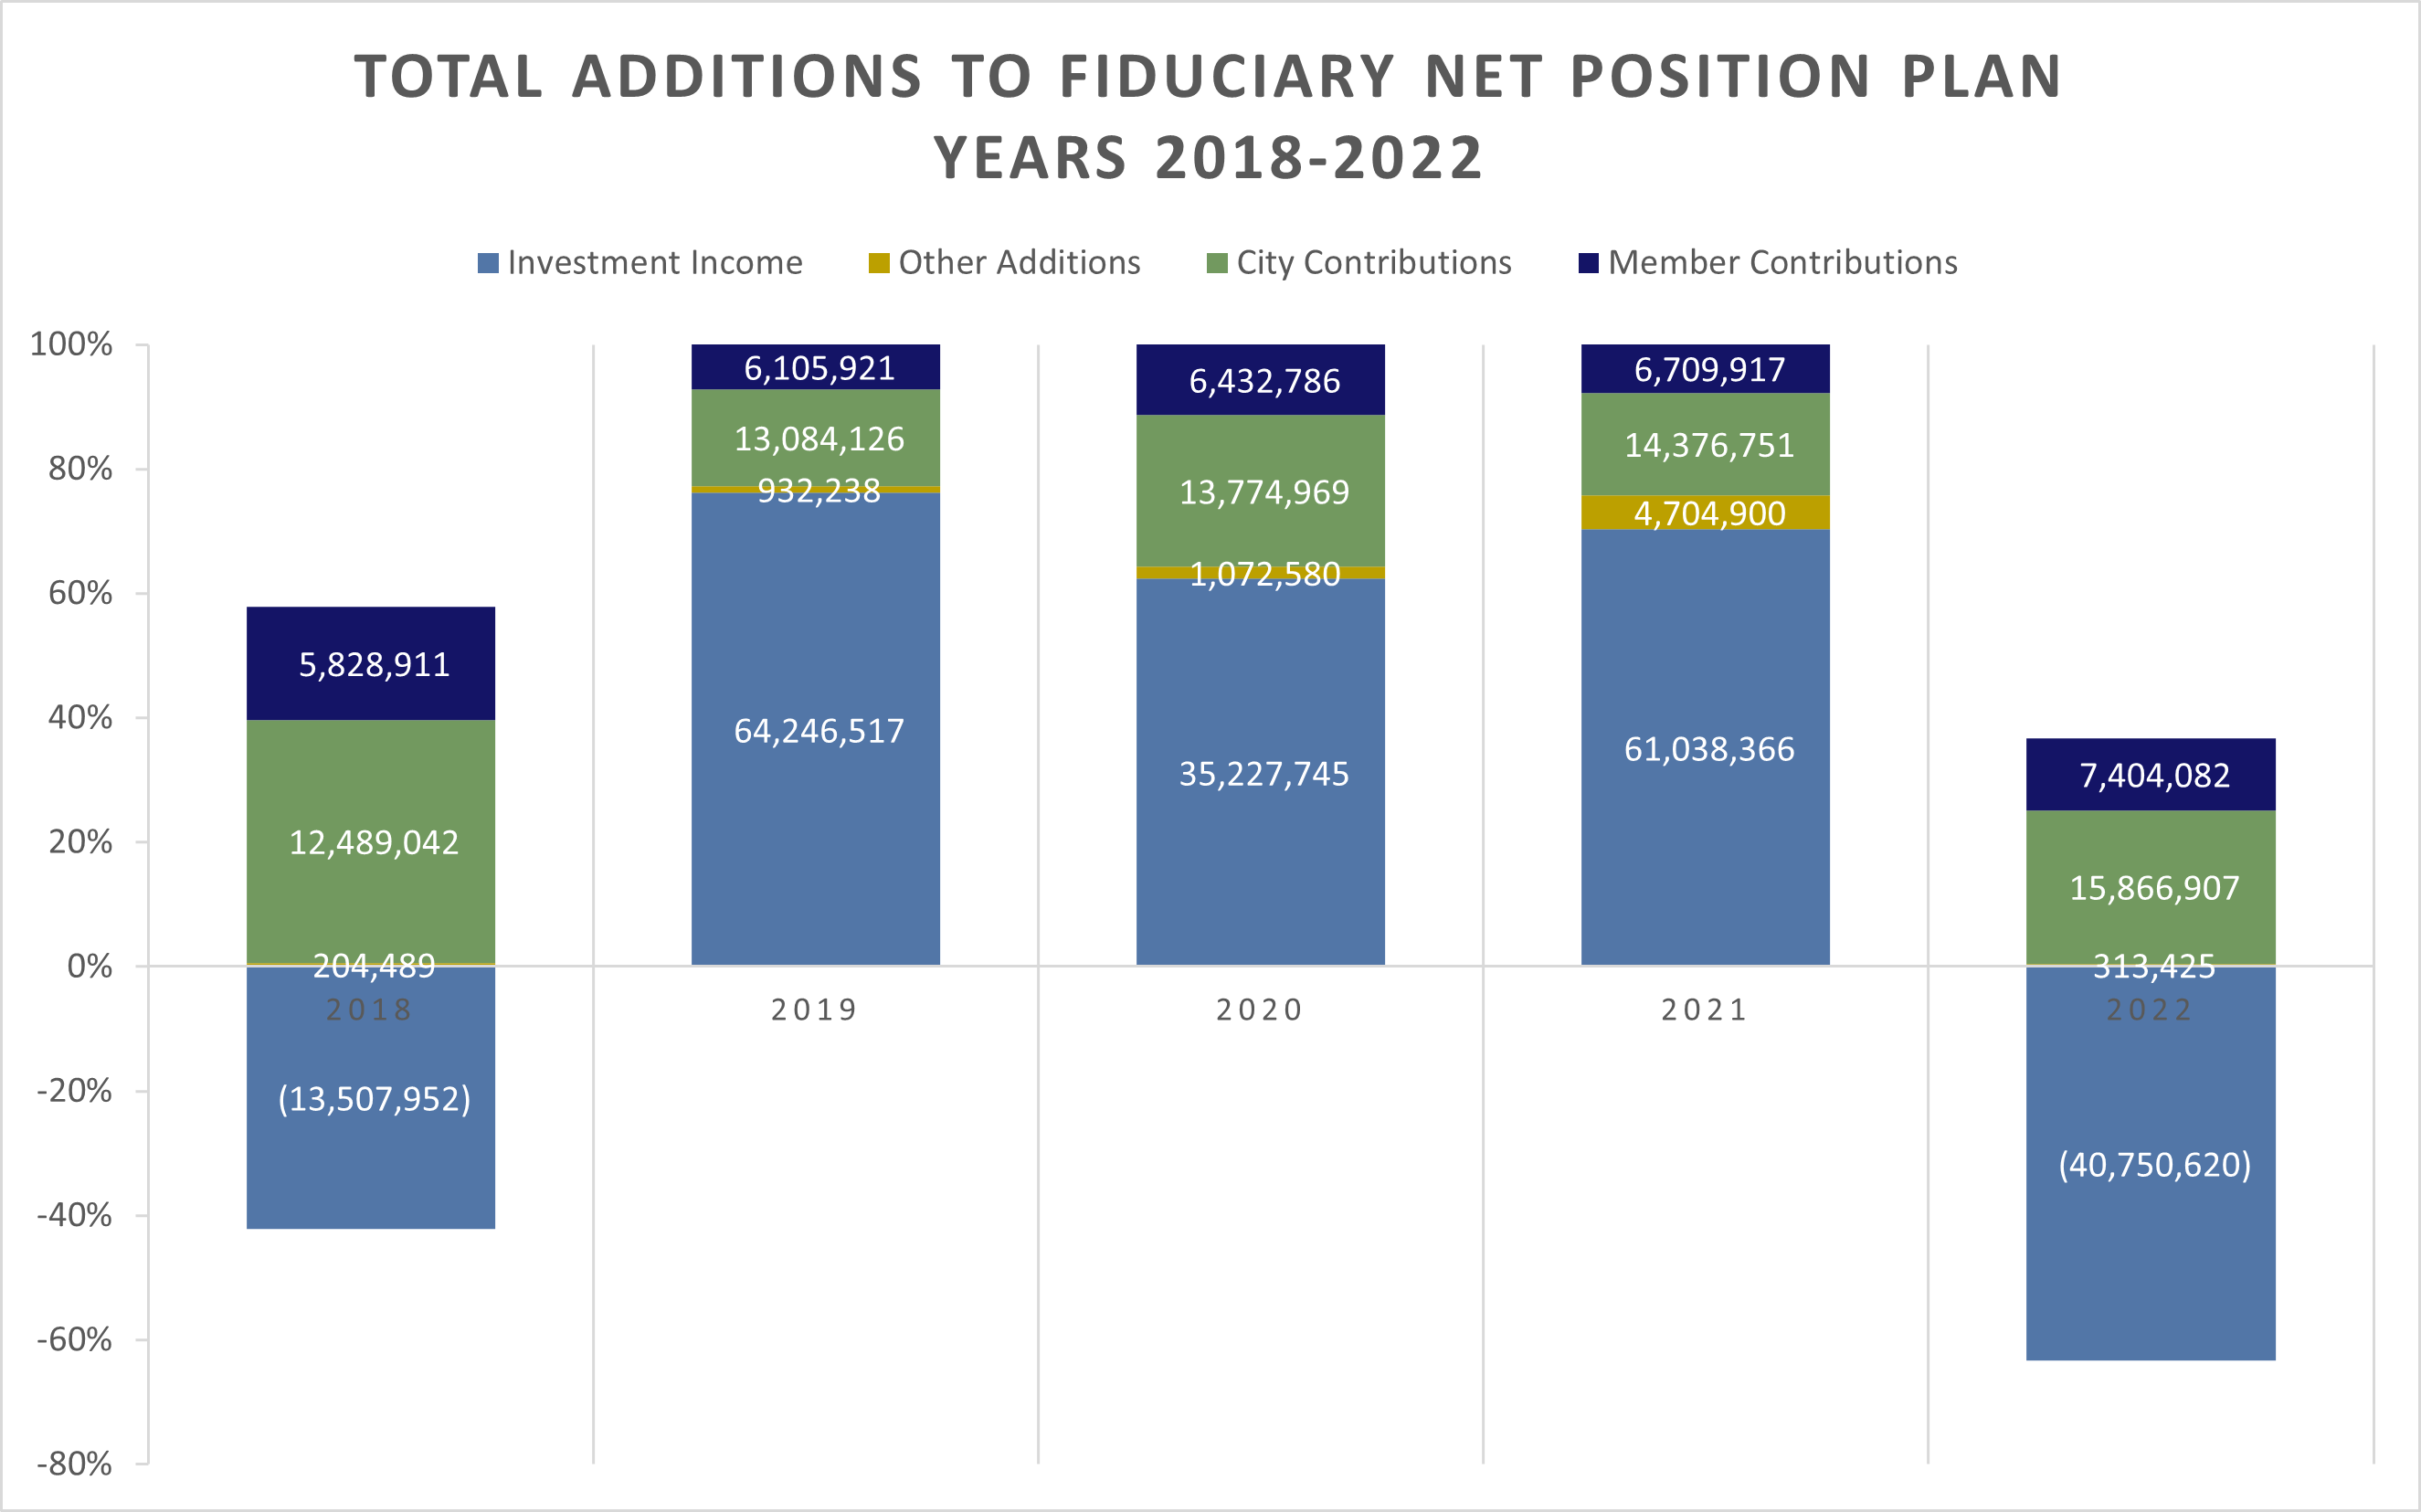 Graph of the total additions to the fiduciary net position for the last 5 years